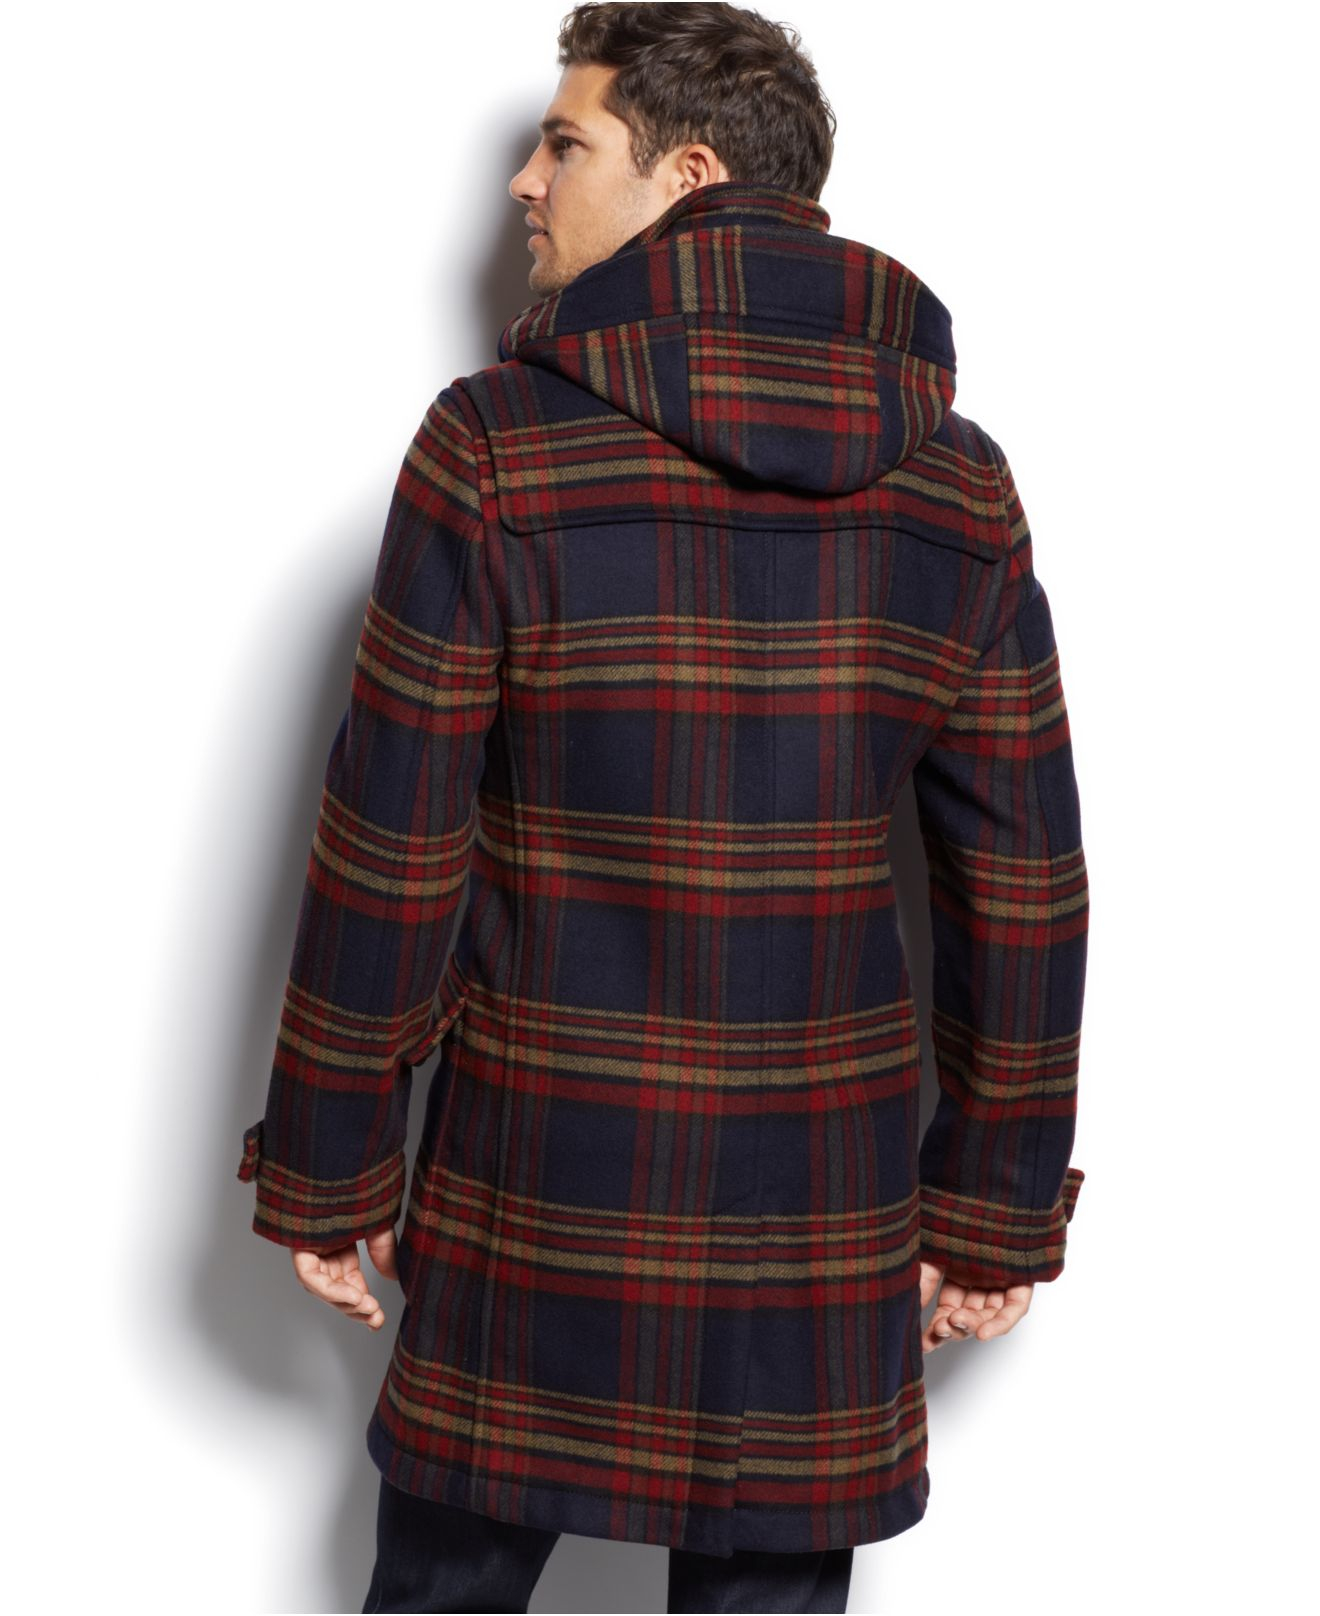 Checked Duffle Coat Hotsell, 57% OFF | www.smokymountains.org